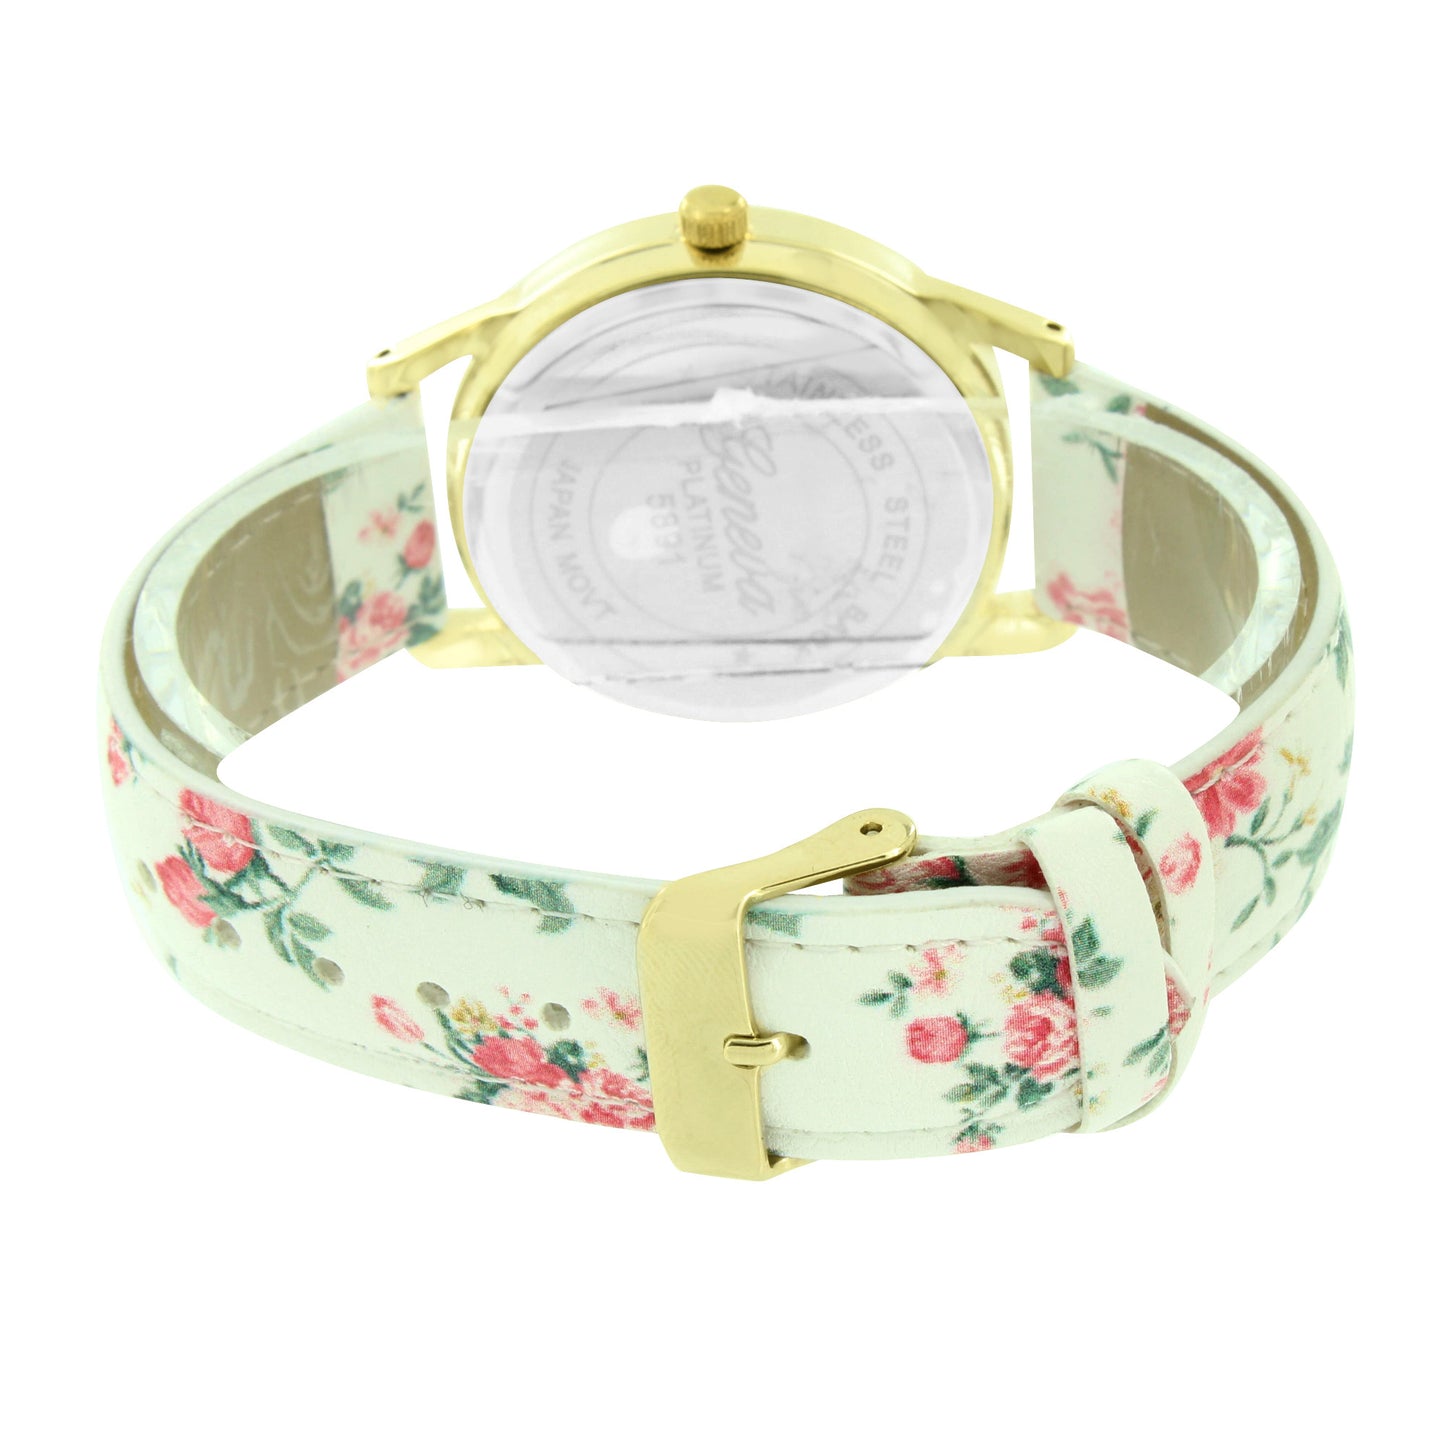 Gold Finish Watch Women White Floral Design Leather Strap